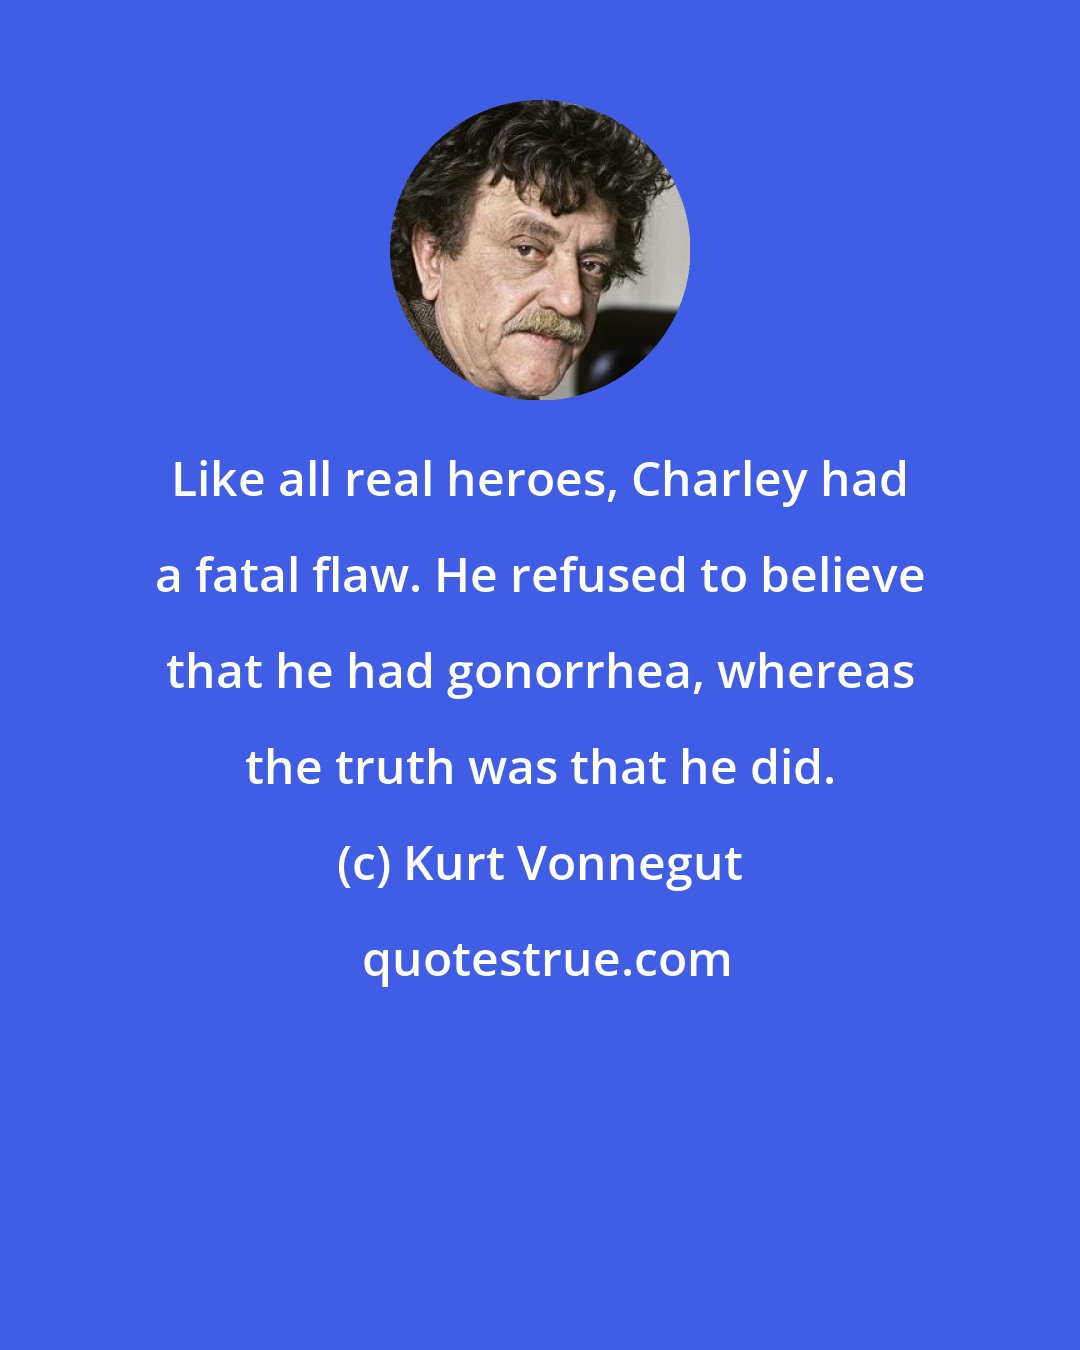 Kurt Vonnegut: Like all real heroes, Charley had a fatal flaw. He refused to believe that he had gonorrhea, whereas the truth was that he did.